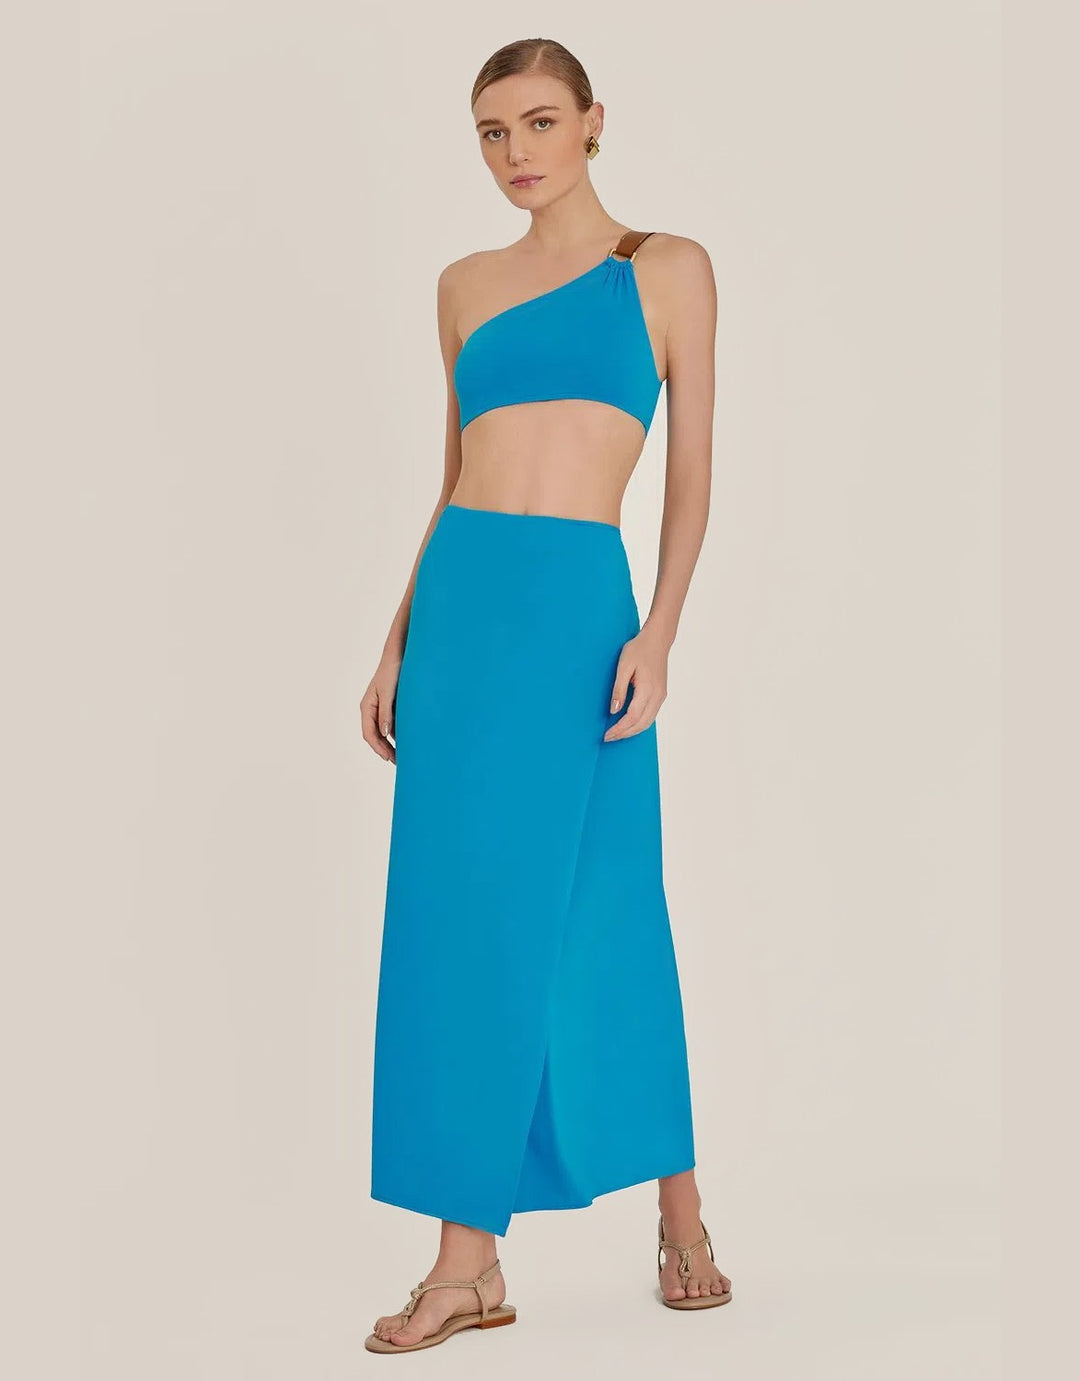 Lenny Niemeyer Sarong Atoll Blue Swimwear cover up